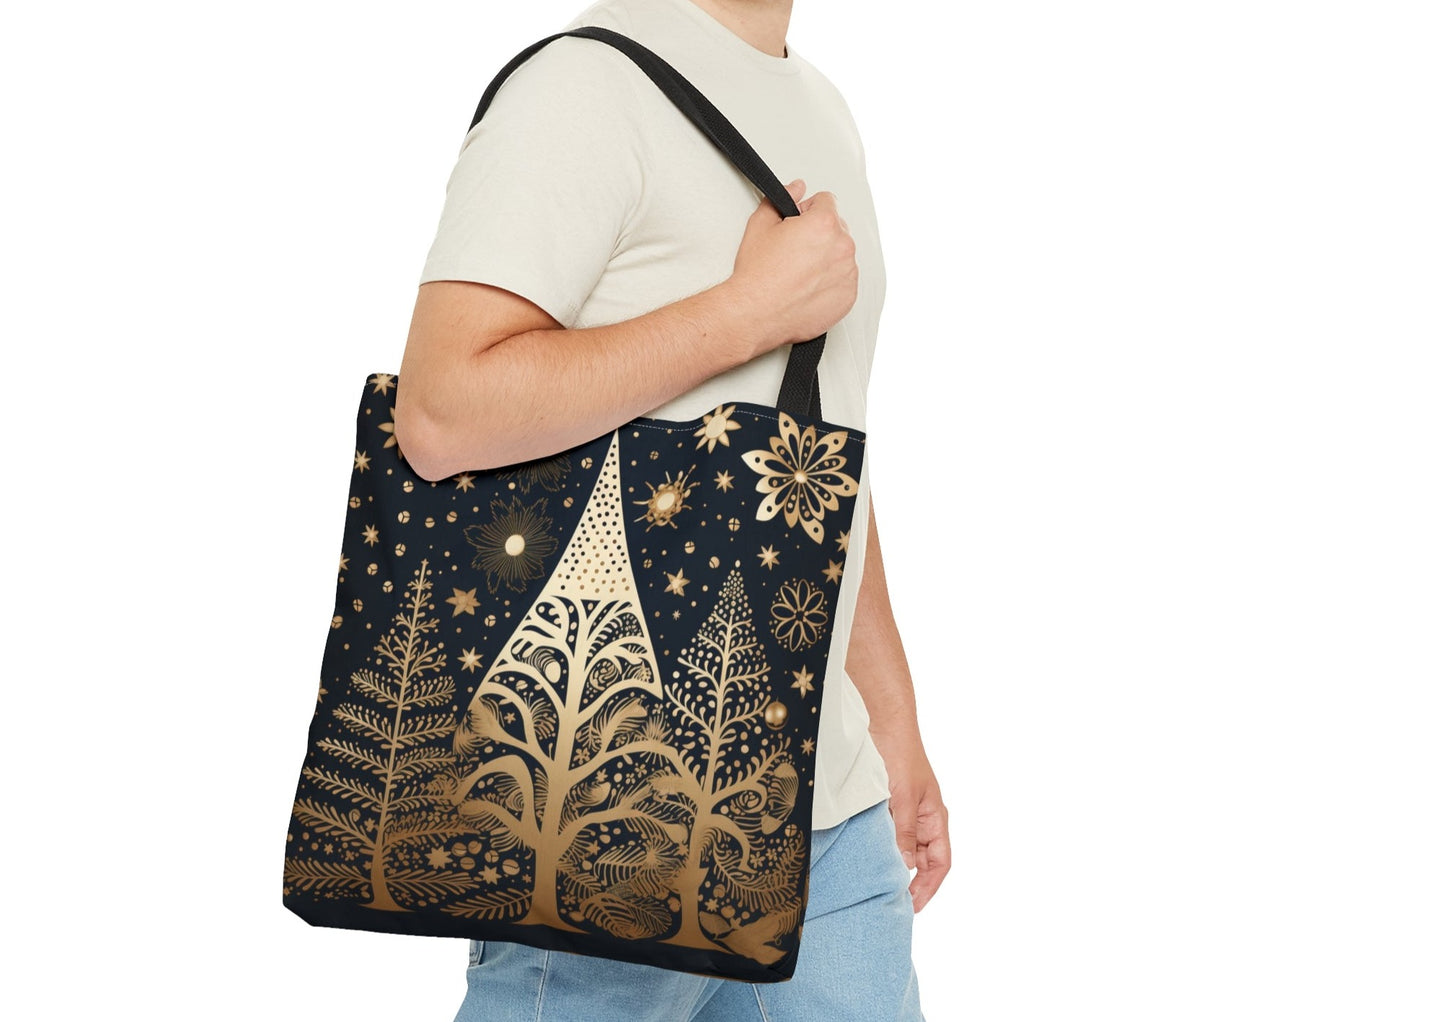 Gold trees and snowflakes on black background | Original Artwork |  Tote Bag printed on both sides